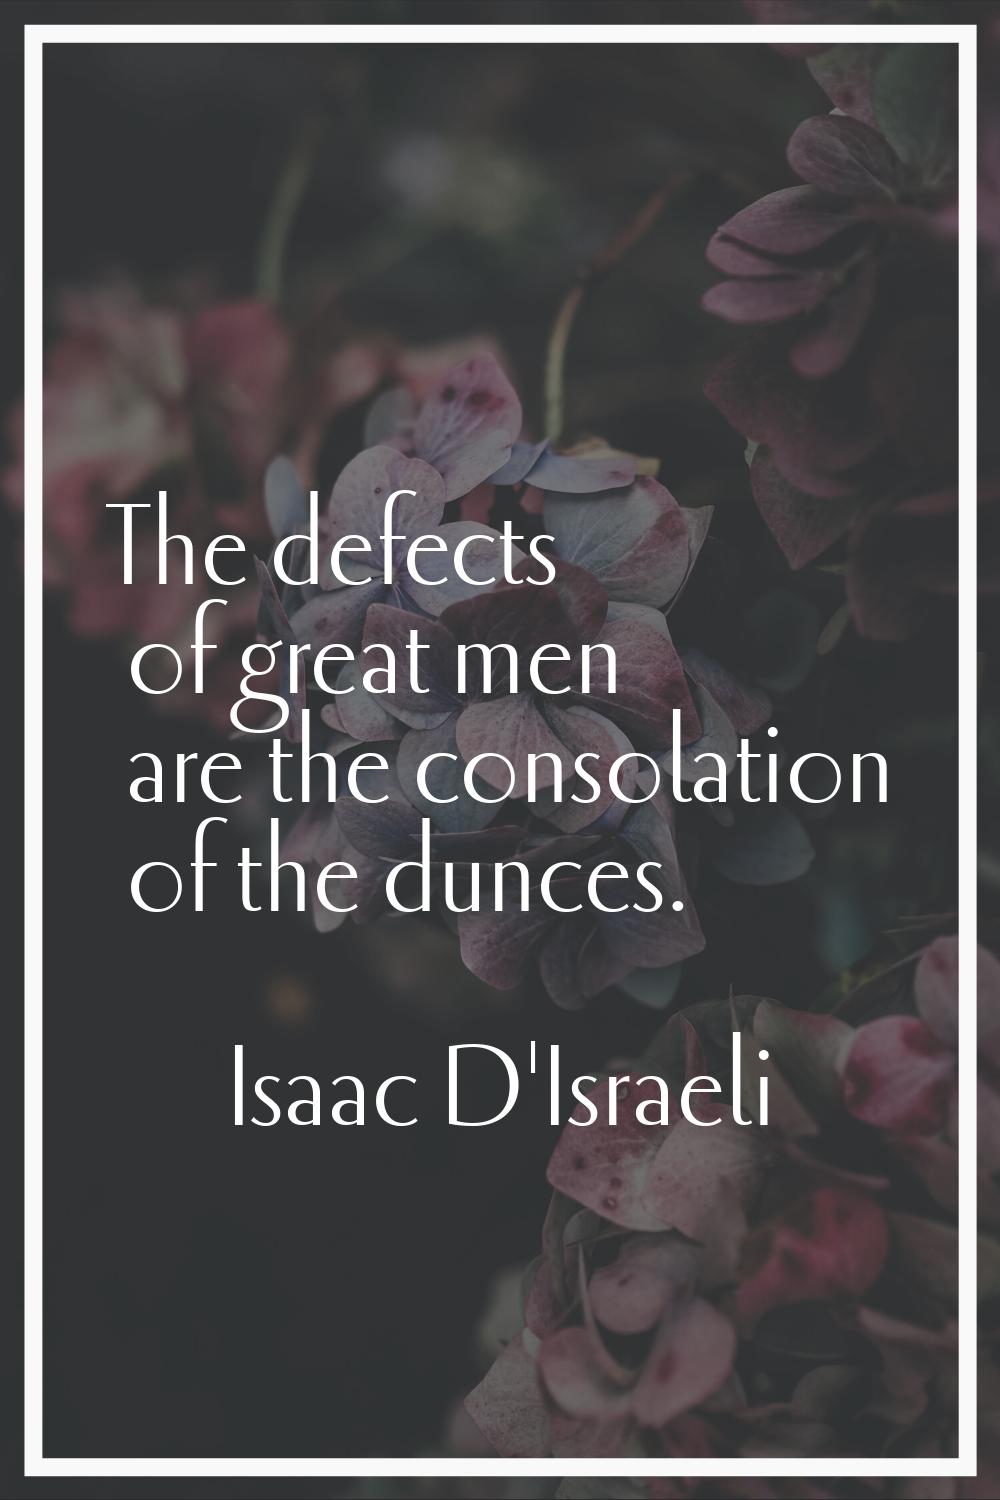 The defects of great men are the consolation of the dunces.